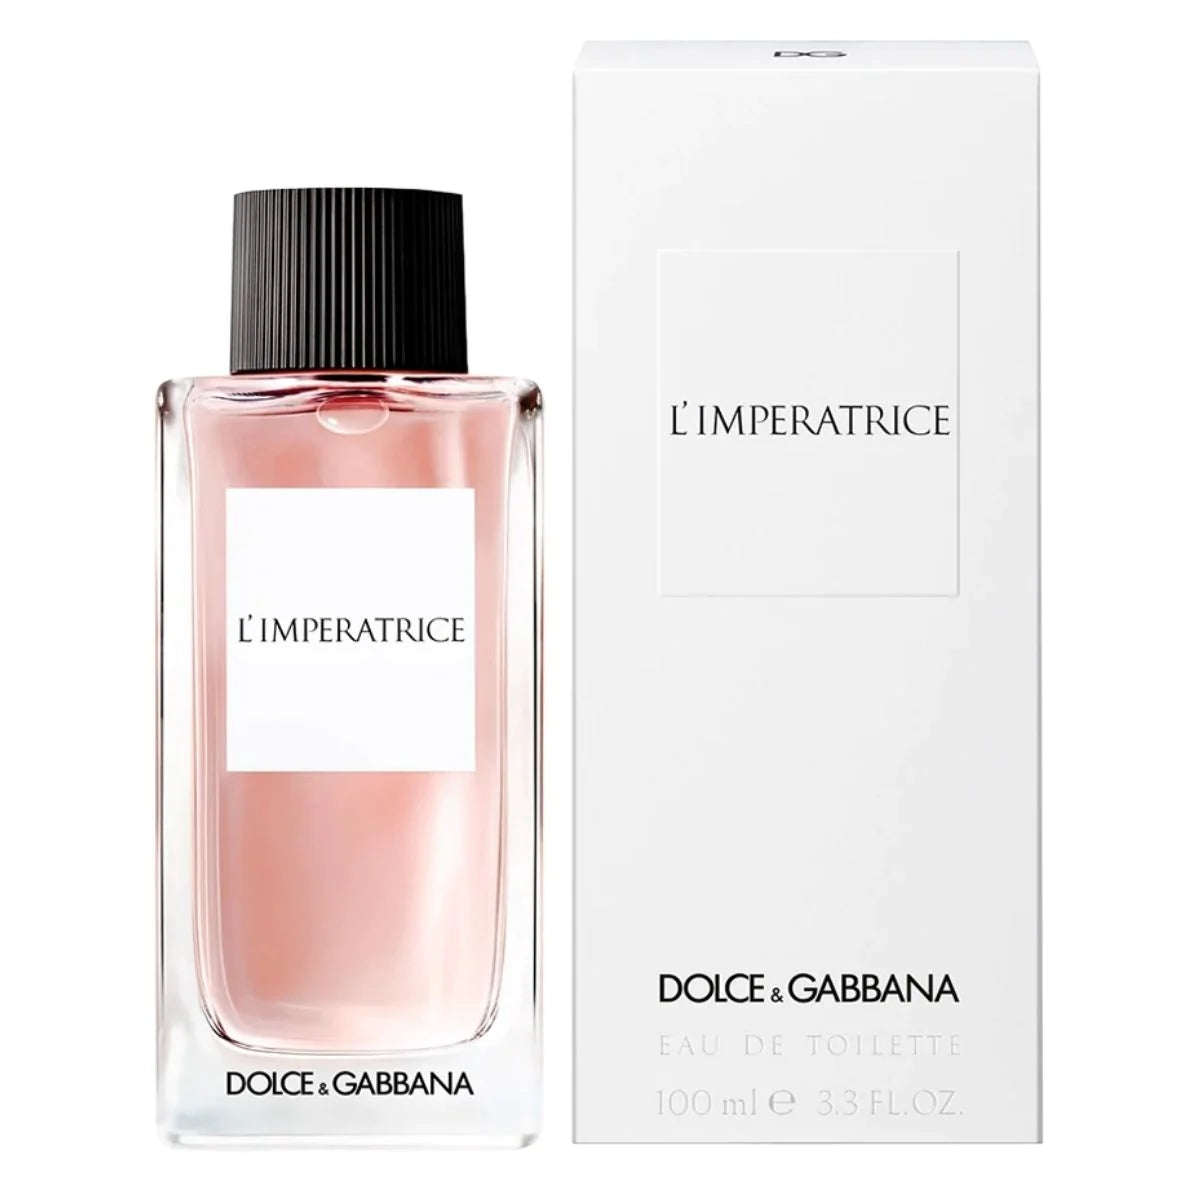 L_imperatrice_by_Dolce___Gabbana_for_Women_EDT_100mL20220816-2690-bj3olb